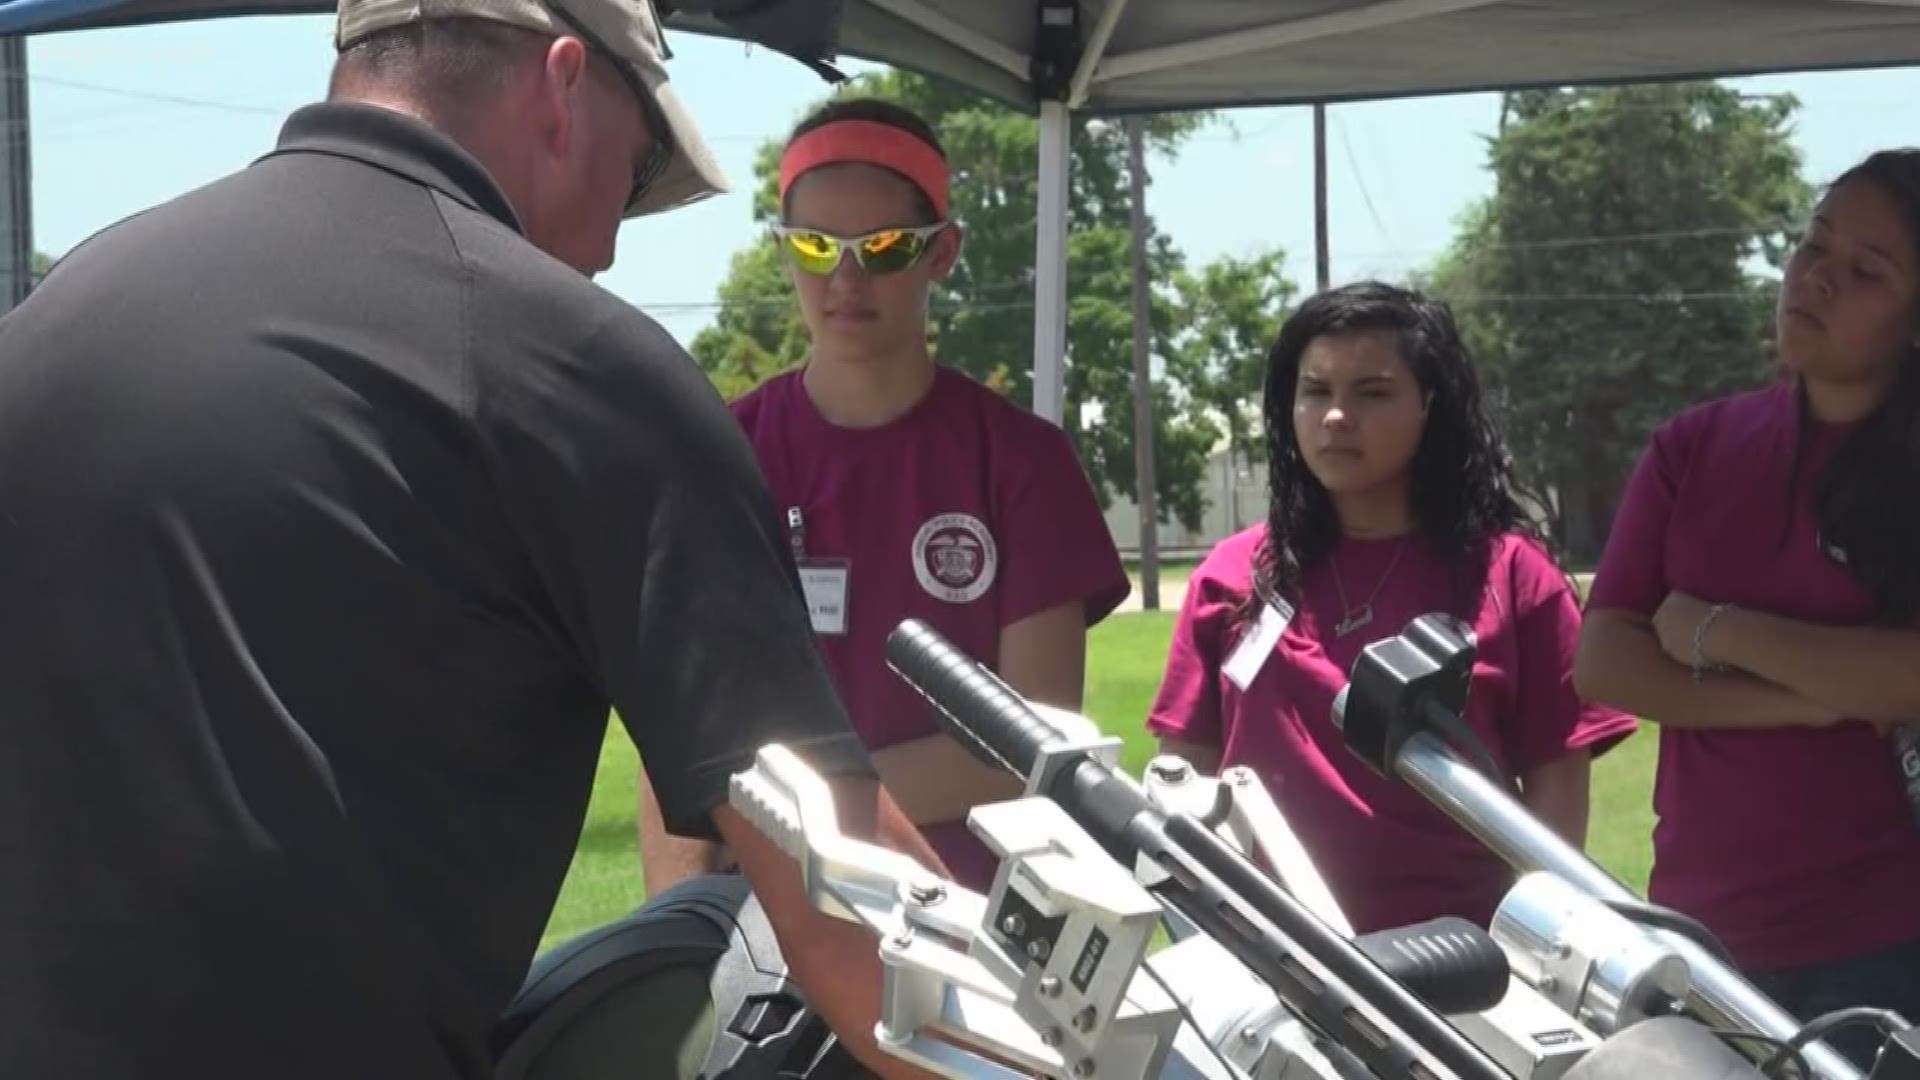 Local high school students get an inside look on what it takes to be local law enforcement.